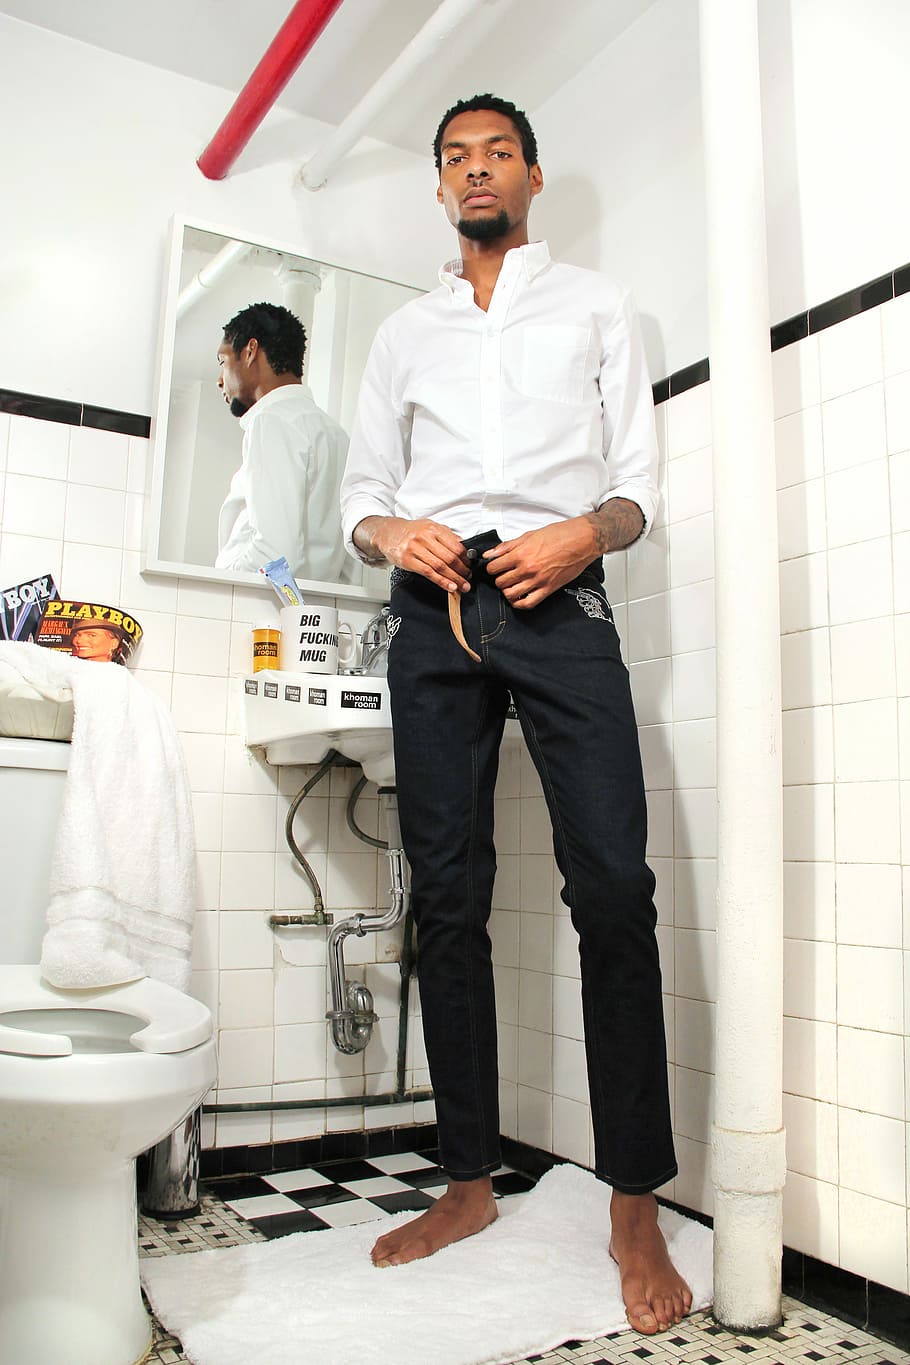 man wearing white dress shirt and black pants standing in comfort room beside mirror holding belt buckle, barefoot man wearing black pants and white dress shirt standing on towel inside bathroom, HD wallpaper